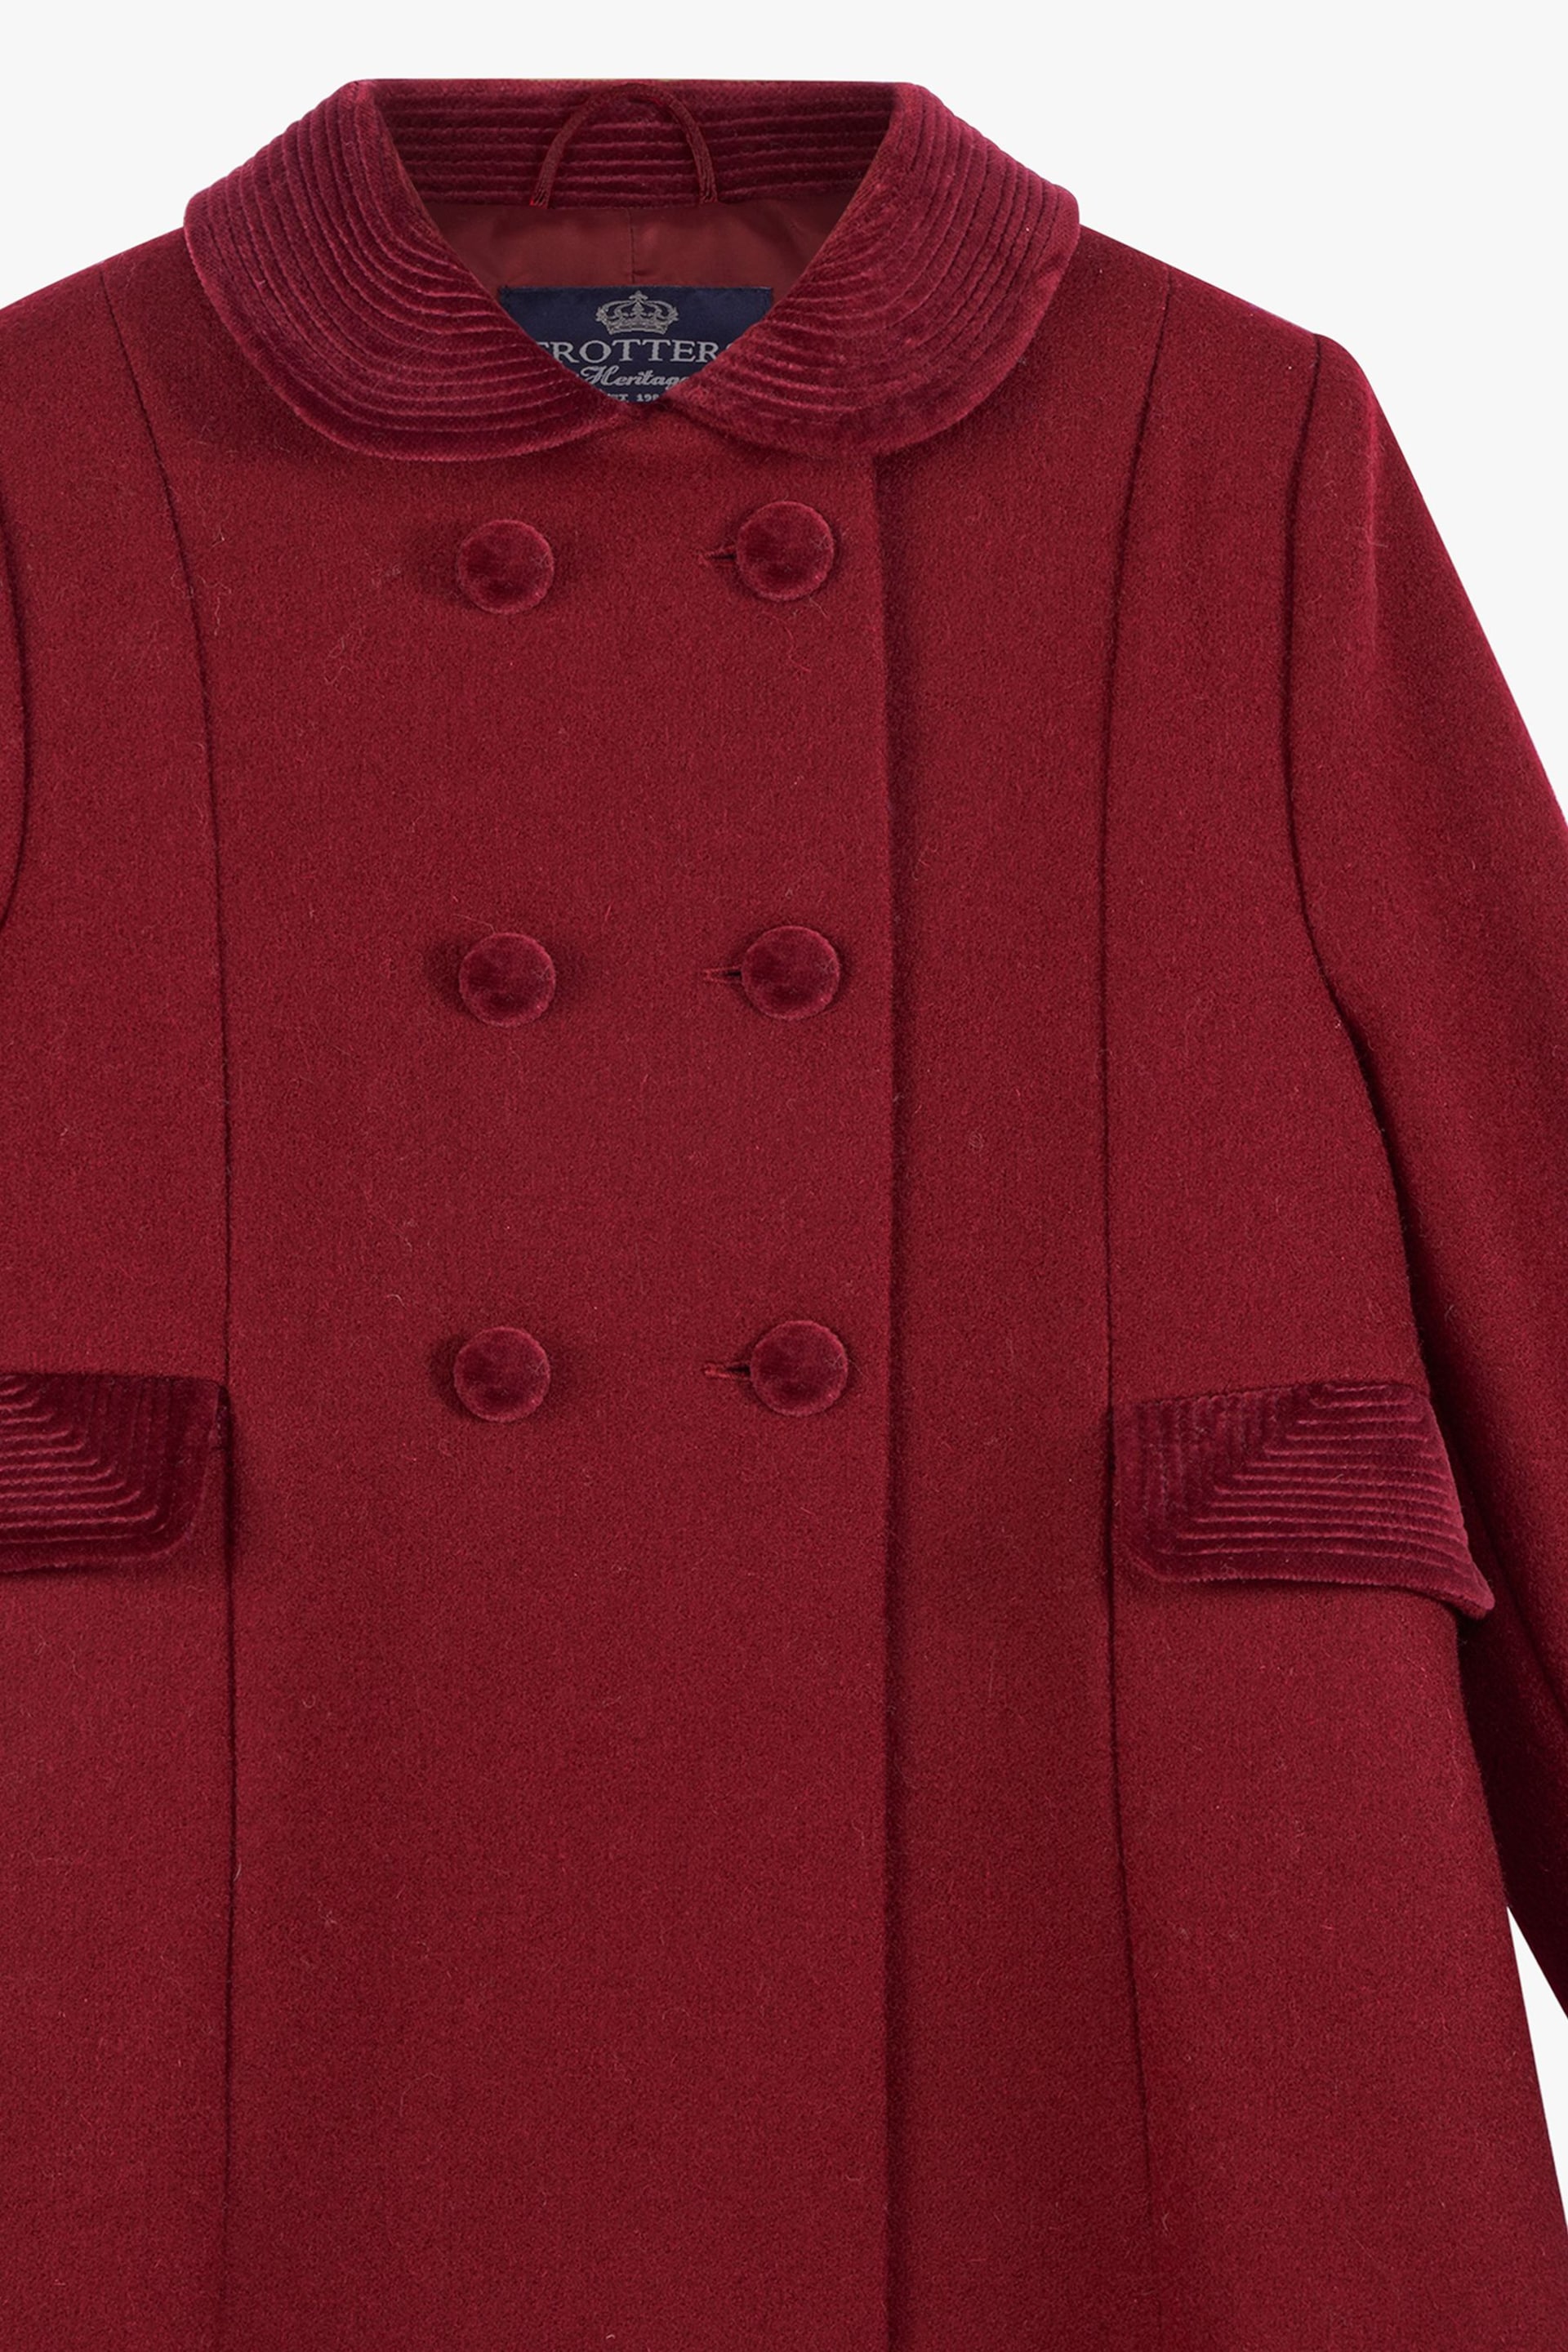 Trotters London Red Burgundy Classic Wool Coat - Image 6 of 6